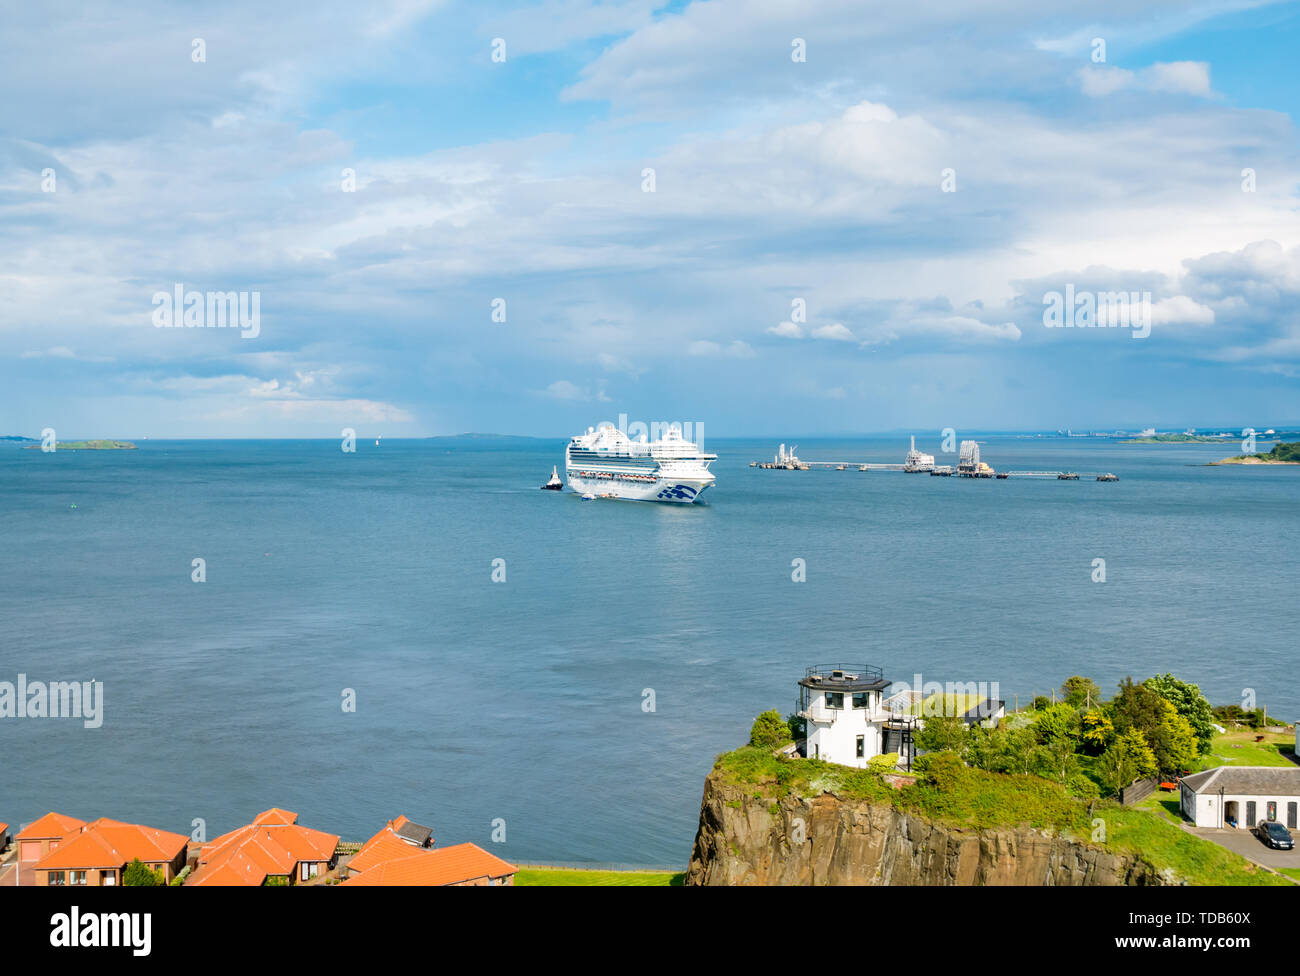 Princess Cruises ship, Crown Princess, moored in Firth of Forth, seen from Forth Rail Bridge, Scotland, UK Stock Photo